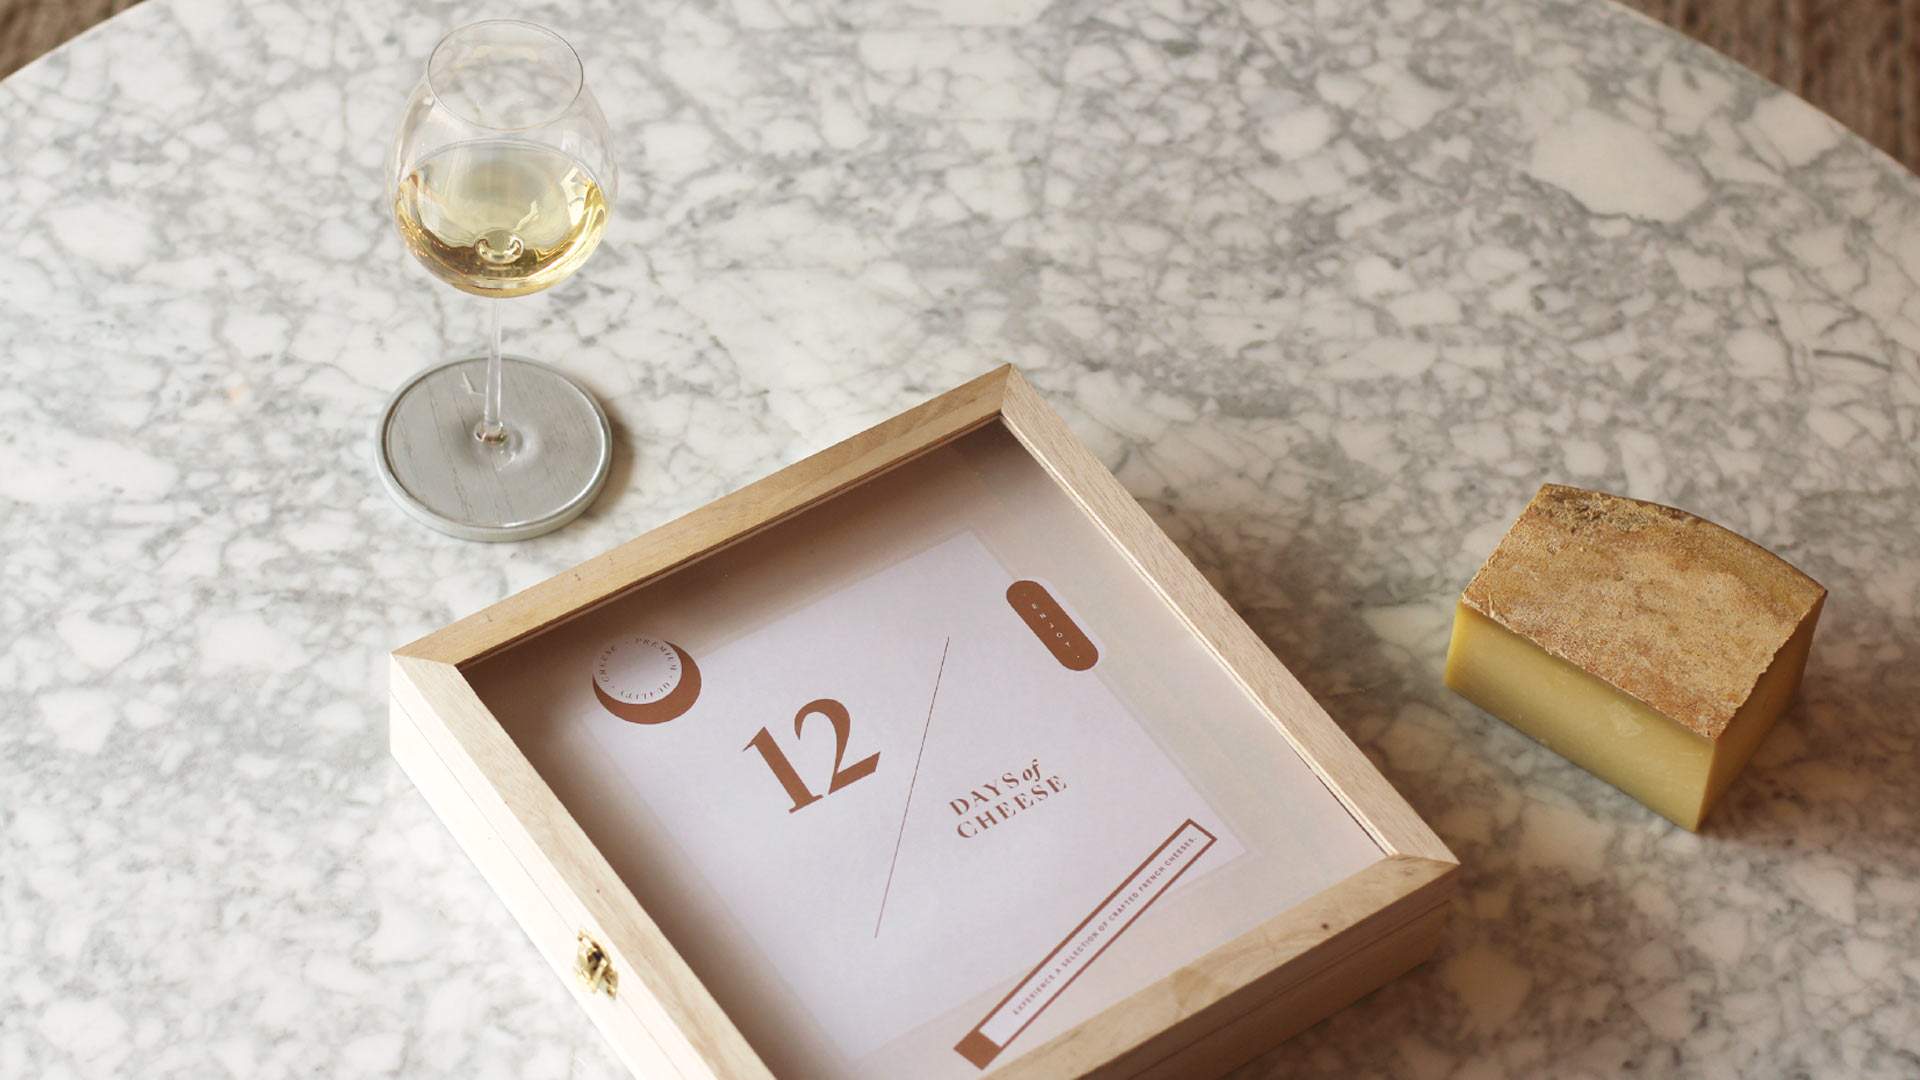 This French Cheese Advent Calendar Is Perfect for Hardcore Cheese Lovers